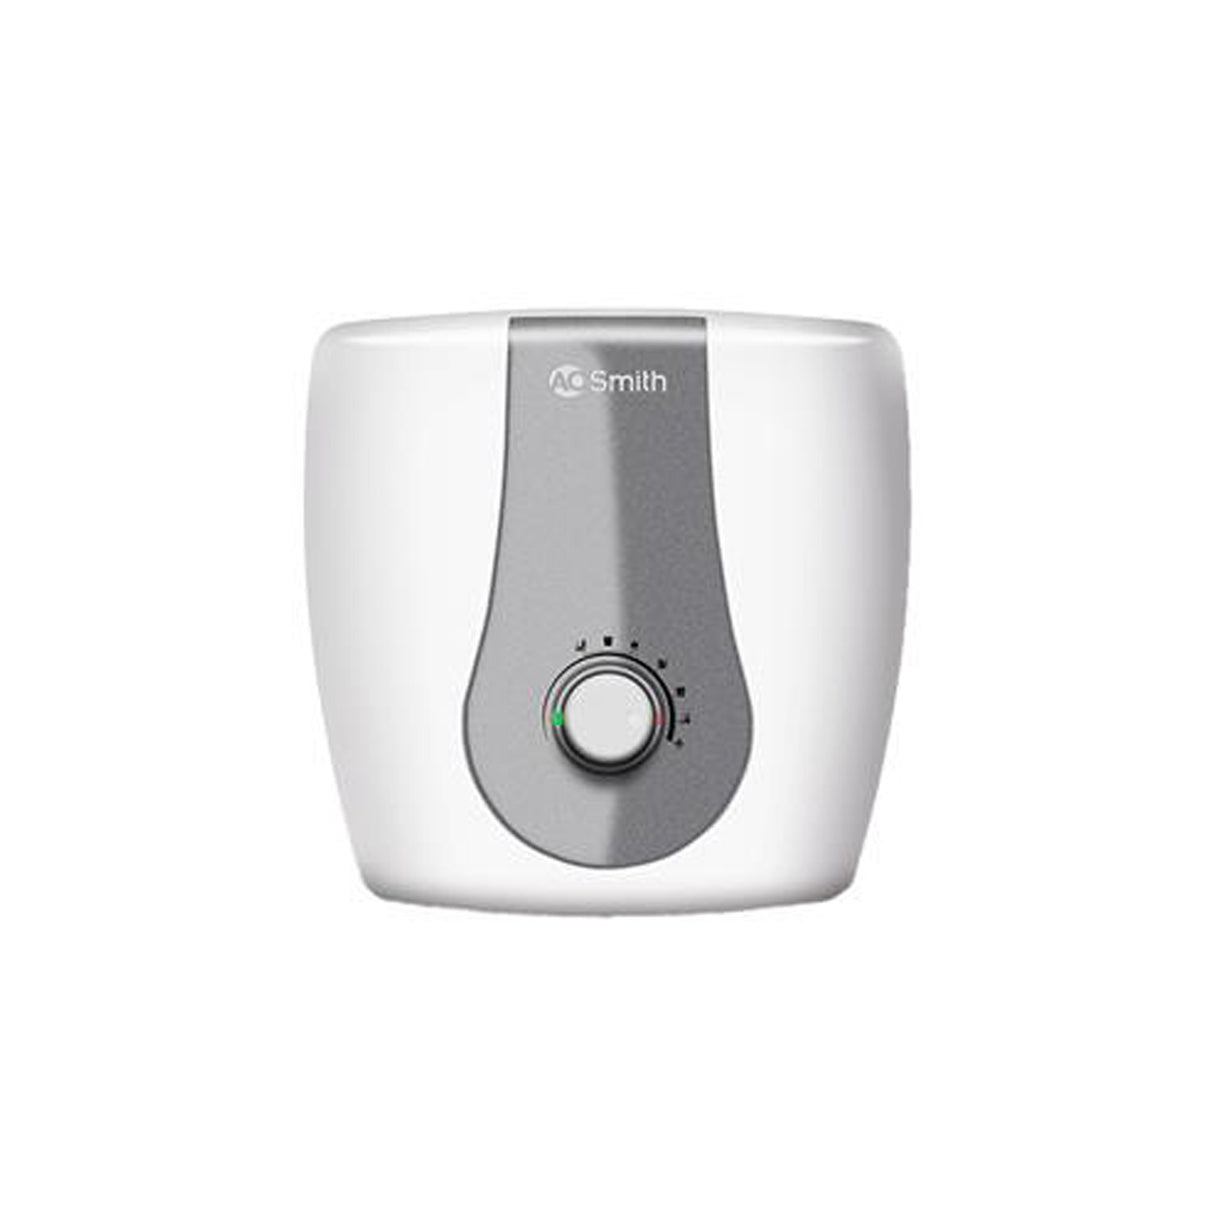 AO Smith Finesse 25L 5-Star Water Geyser – Best Water Heater for Powerful Heating.